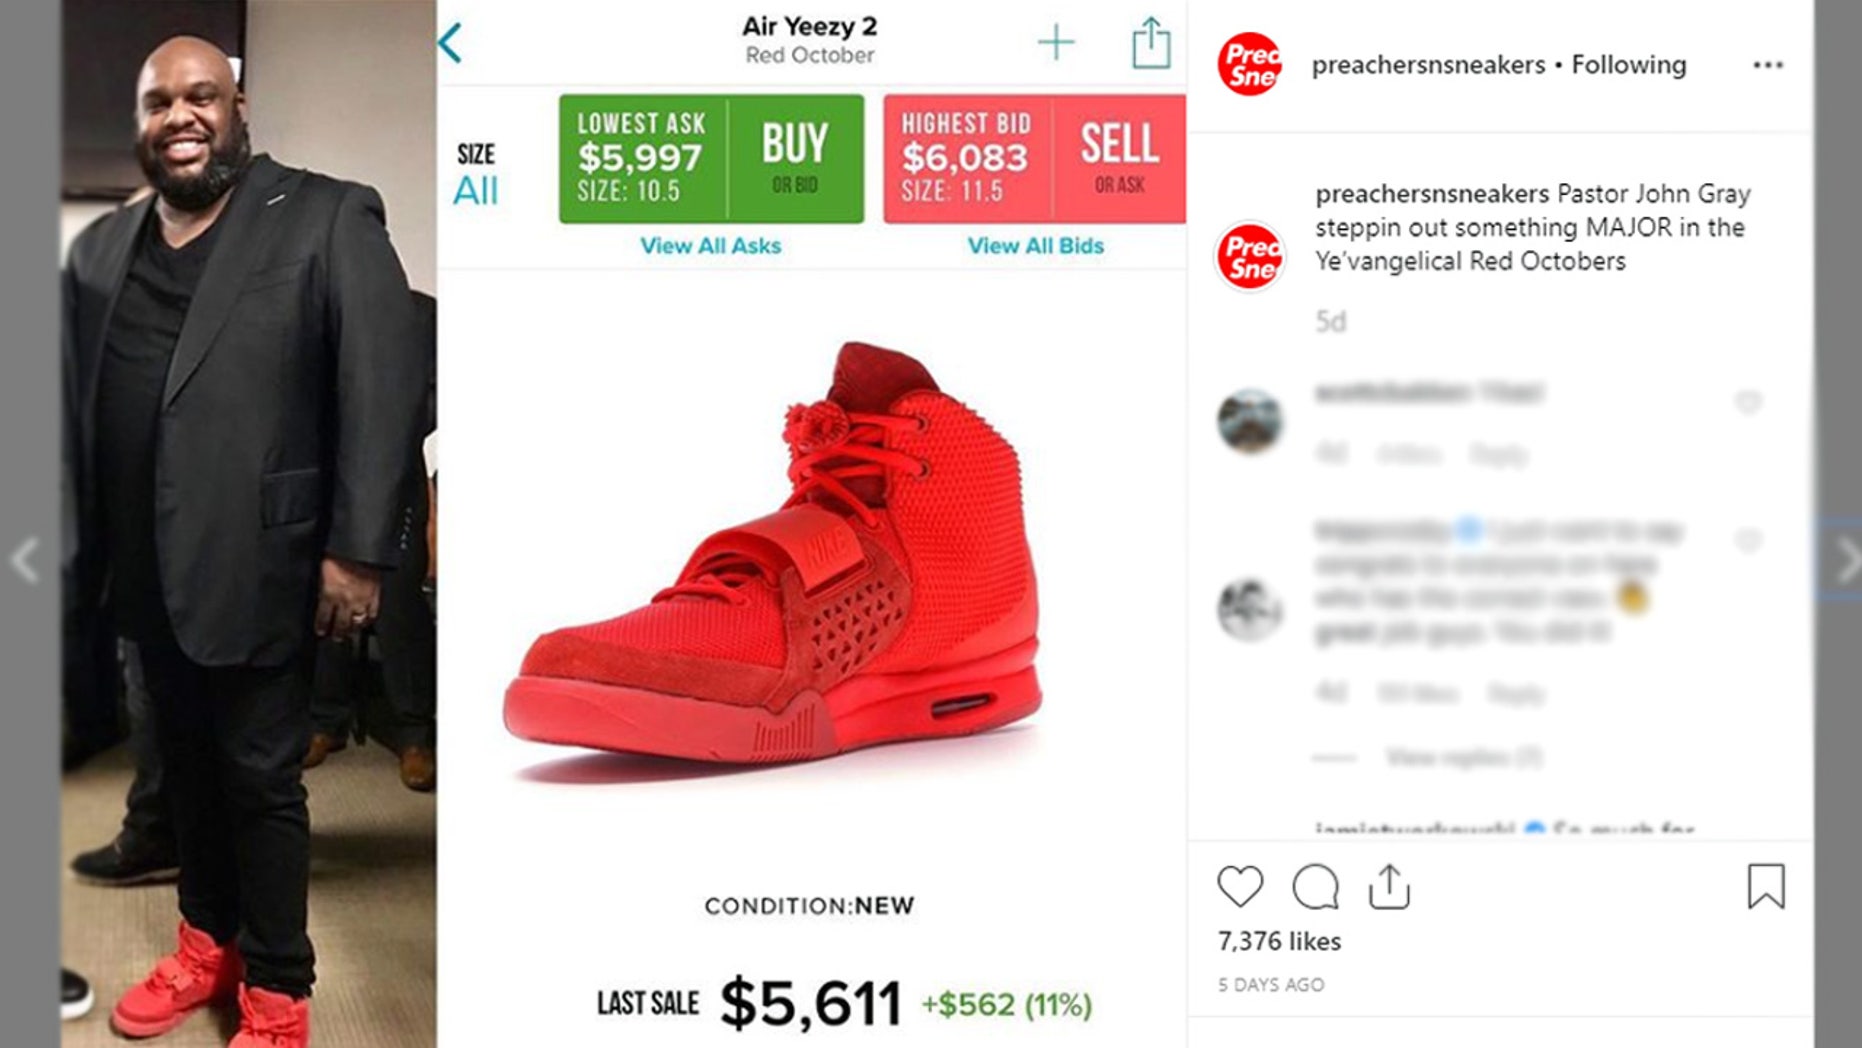 The Instagram account @PreachersNSneakers went viral for calling out high profile pastors for wearing costly kicks.